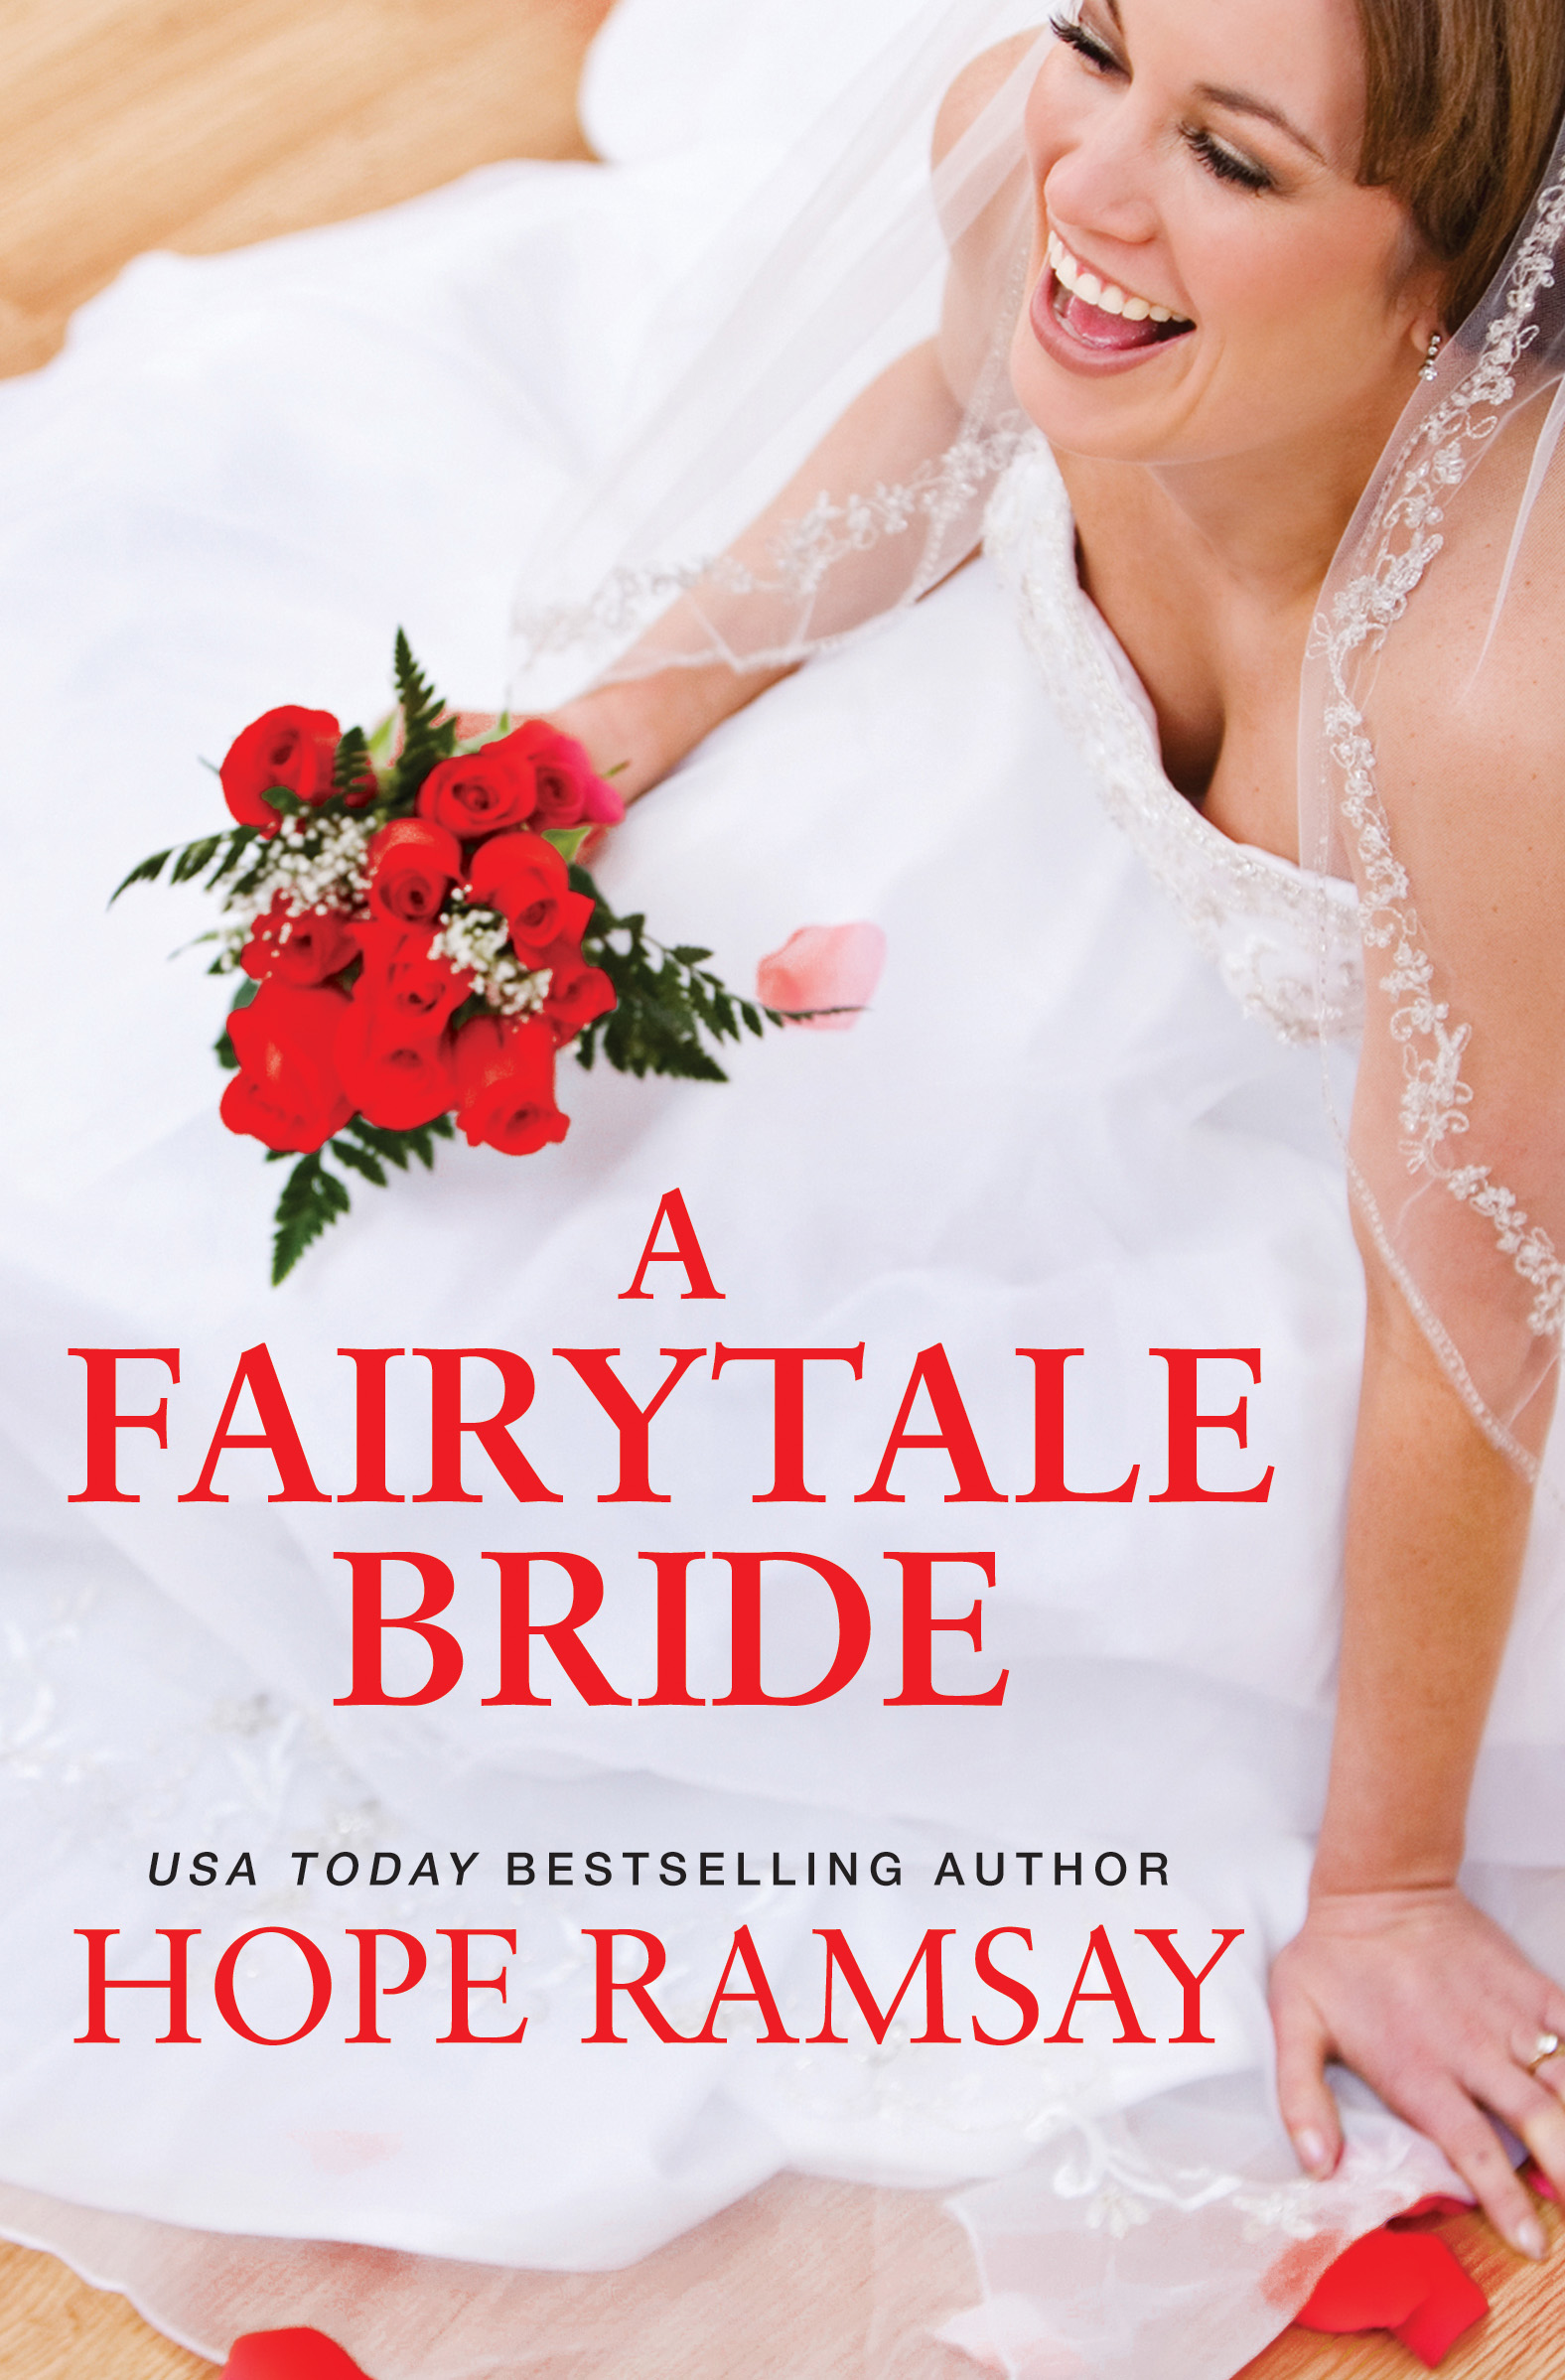 A Fairytale Bride by Hope Ramsay